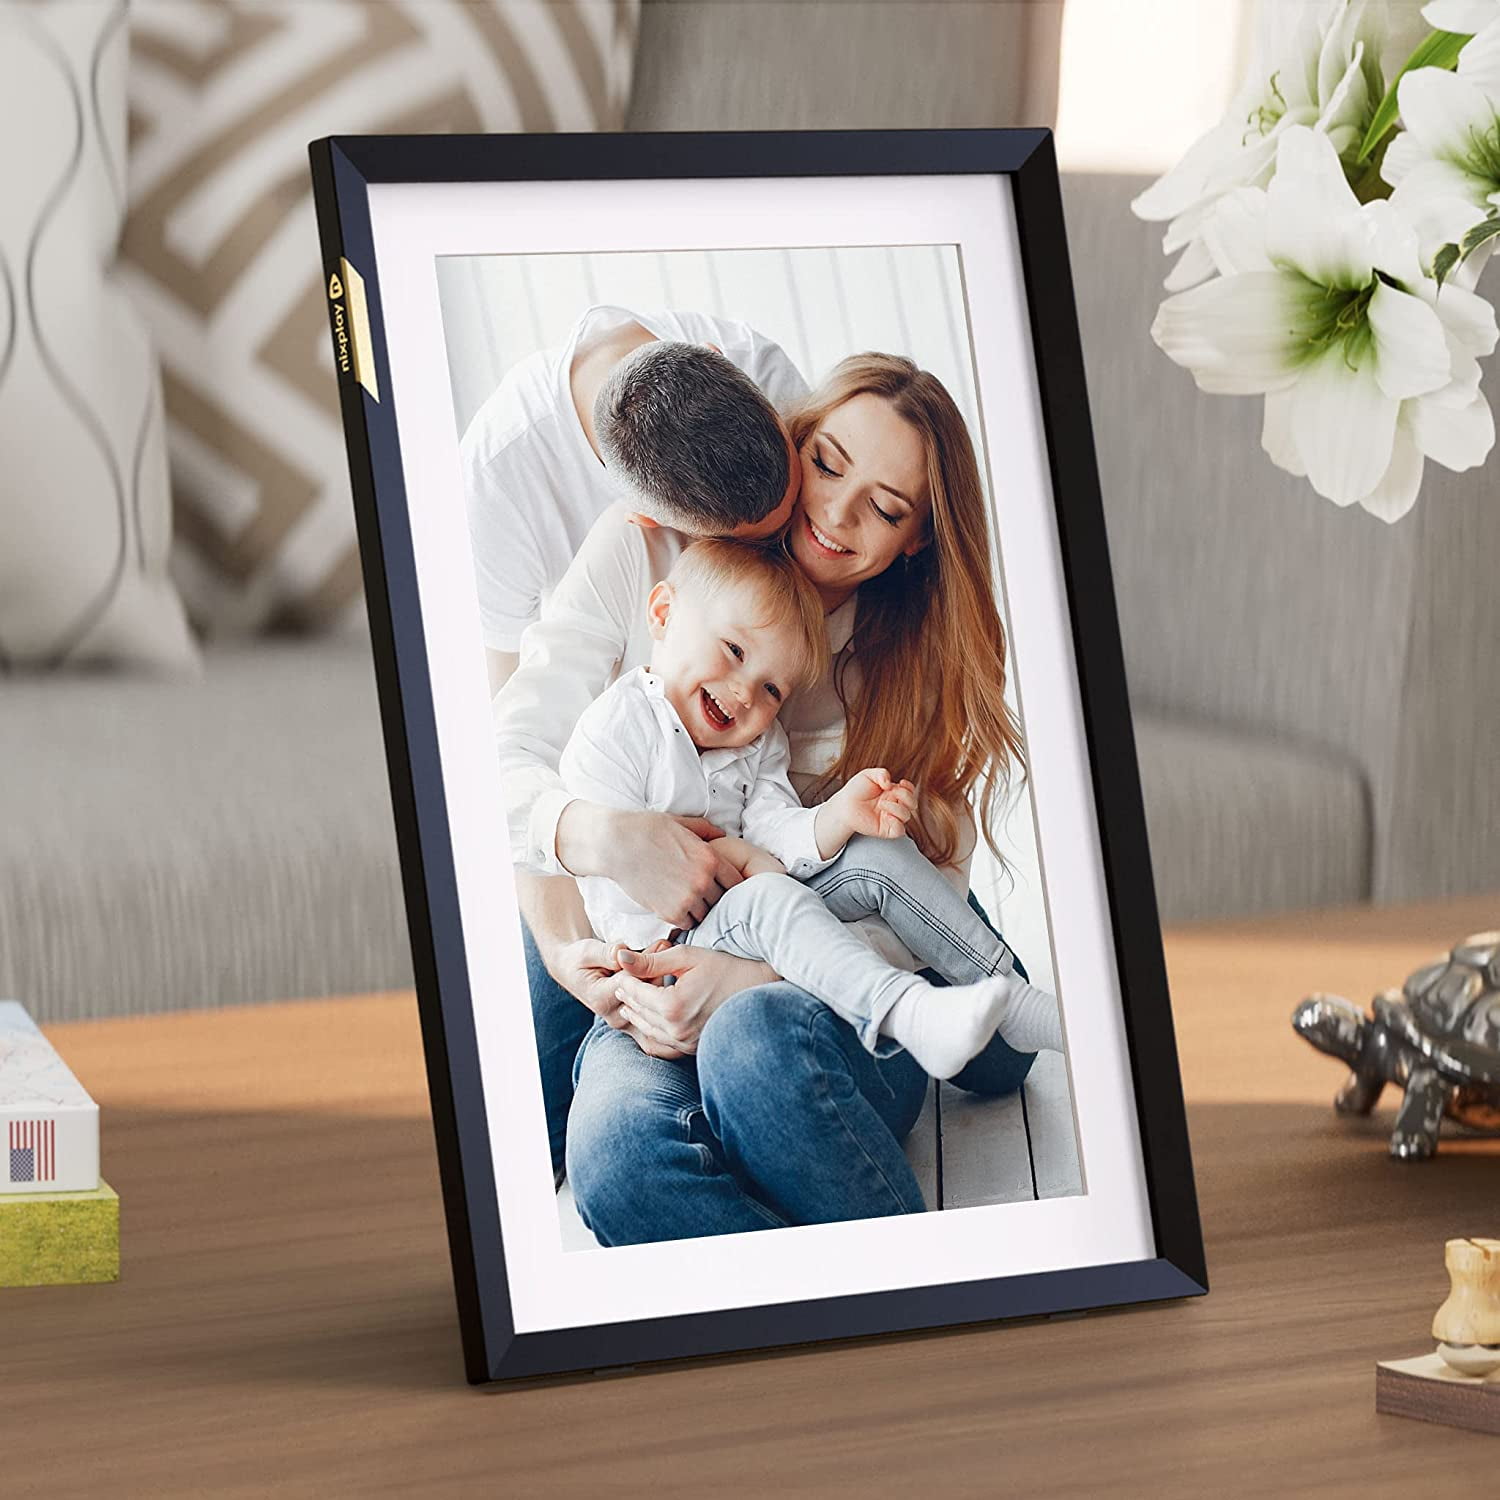 Nixplay 10.1 inch Touch Screen Digital Picture Frame with WiFi (W10P), Classic  Mat, Share Photos and Videos Instantly via Email or App